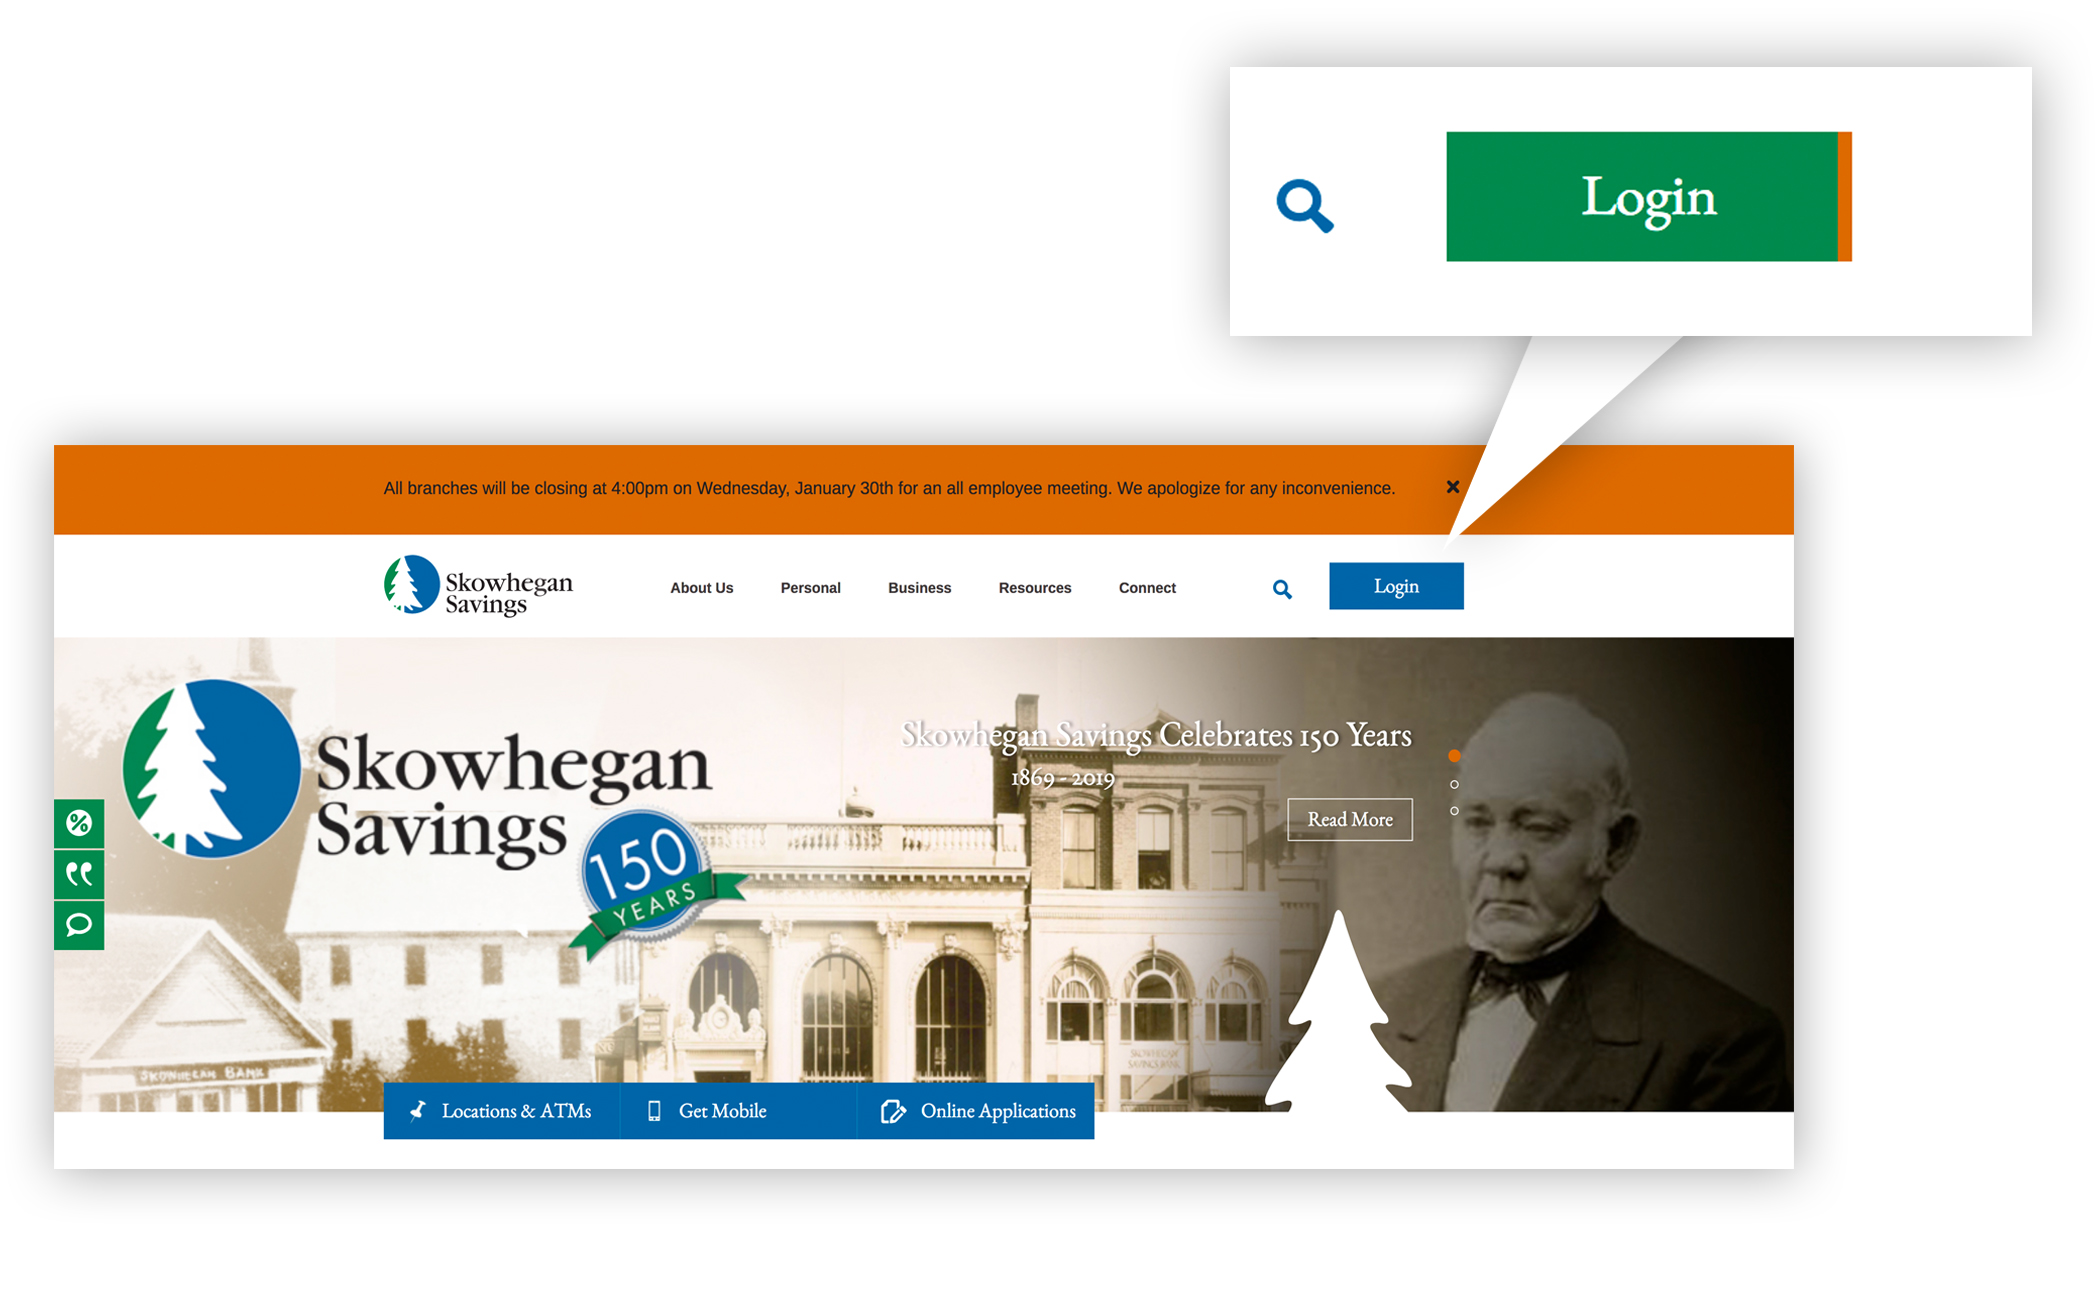 A screenshot of the Skowhegan Savings home page, featuring a look at our online banking login button